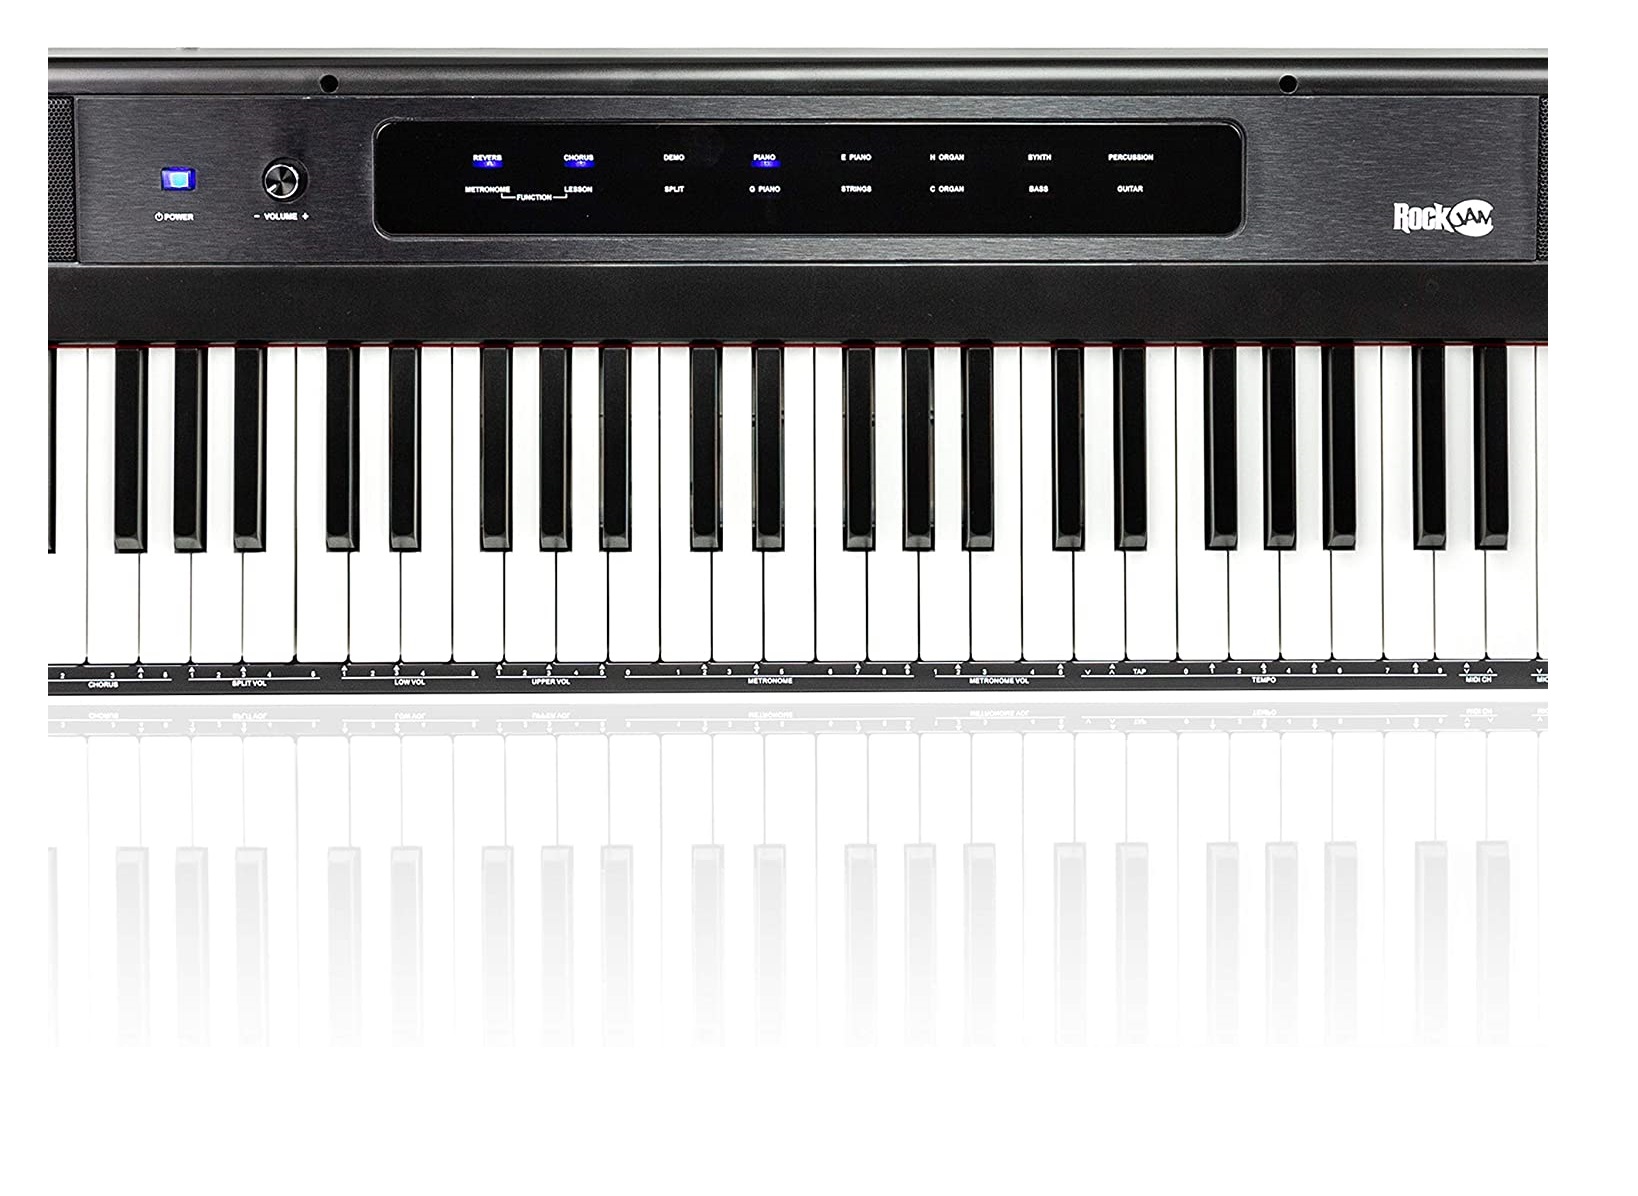 RockJam electric piano 88 keyboards and stand, in Headington, Oxfordshire